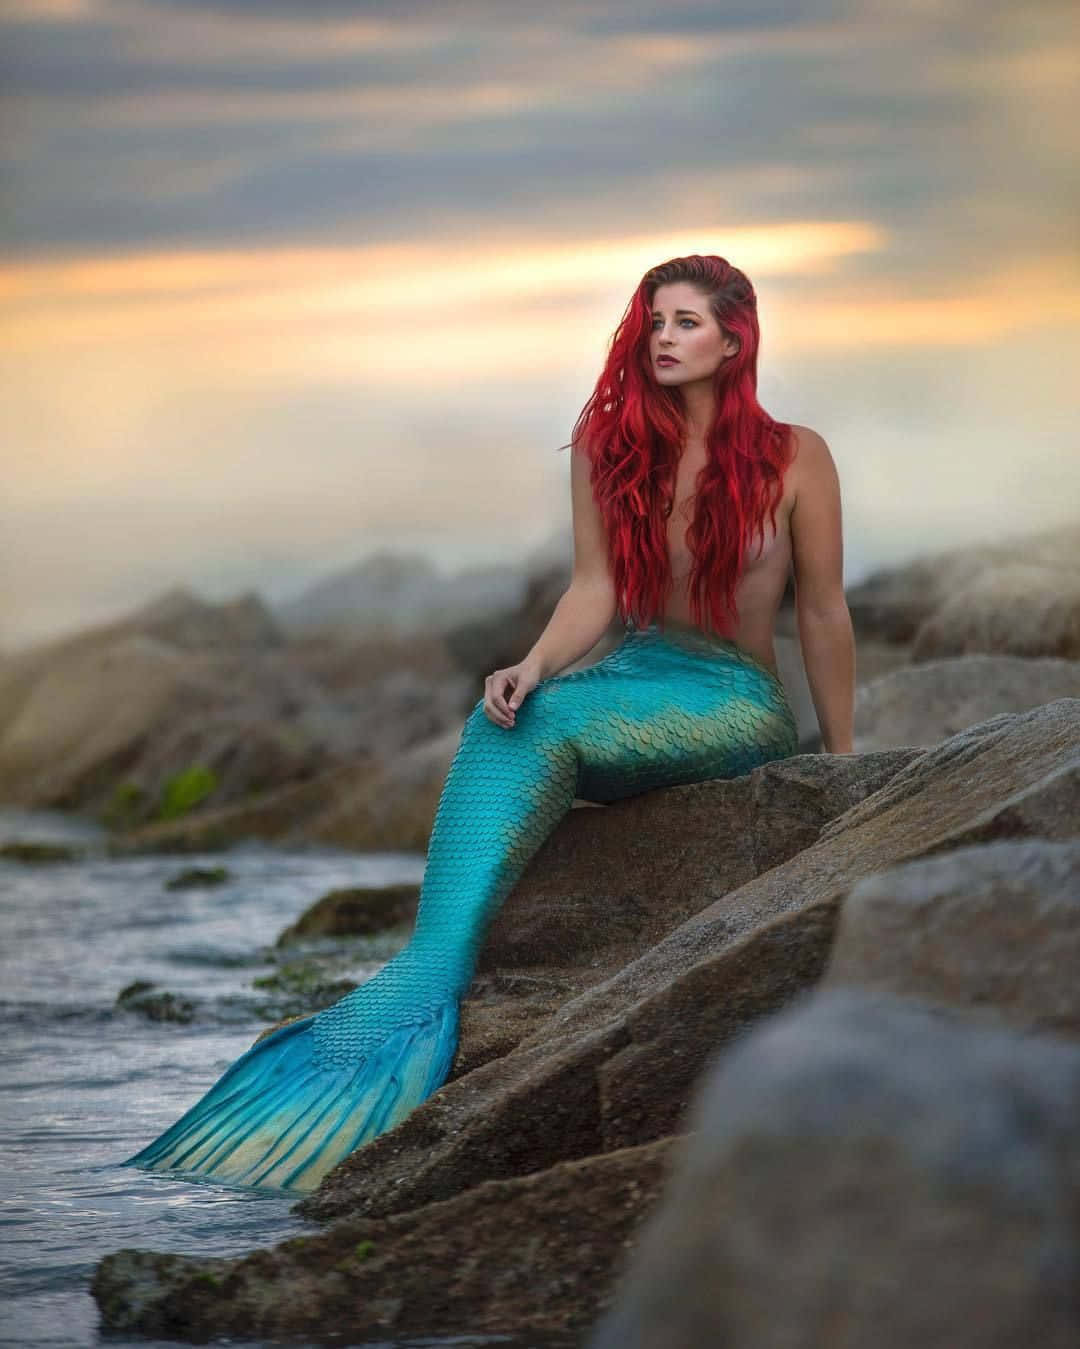 200+] Mermaid Pictures | Wallpapers.com